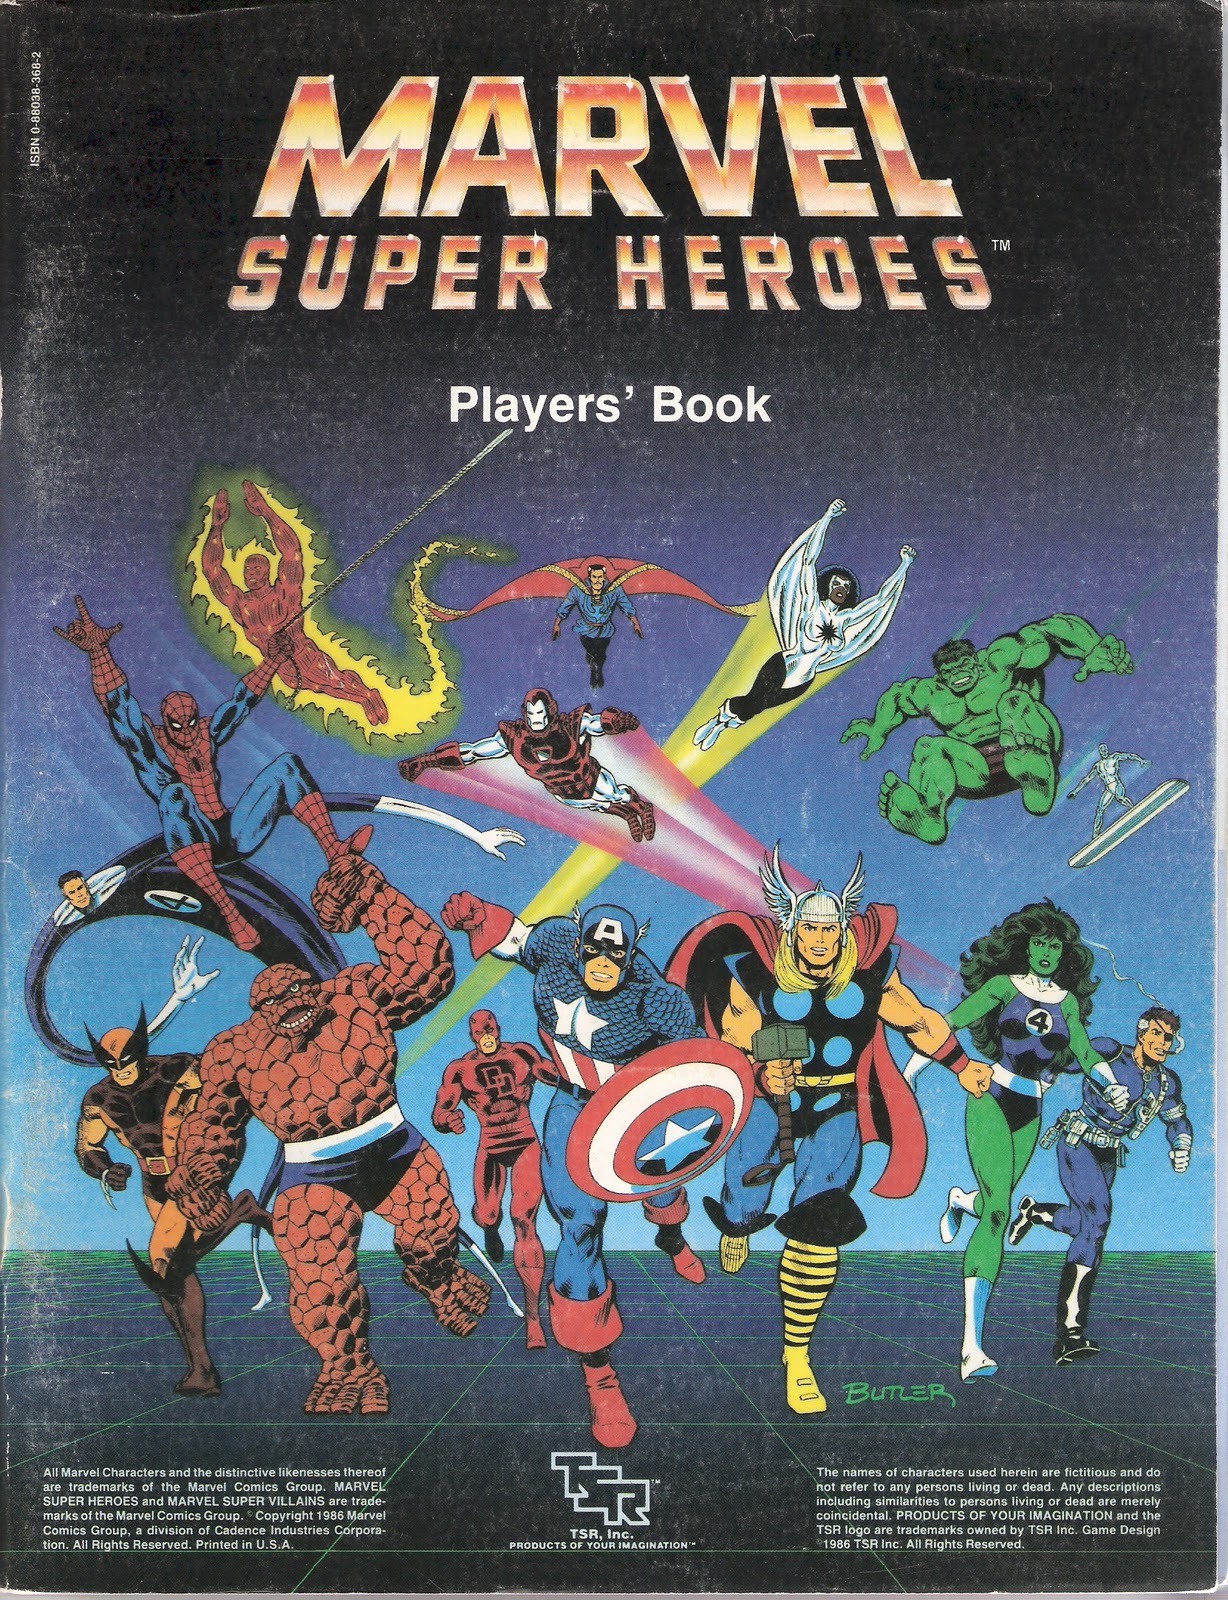 Super Hero Role-Playing Games • Comic Book Daily